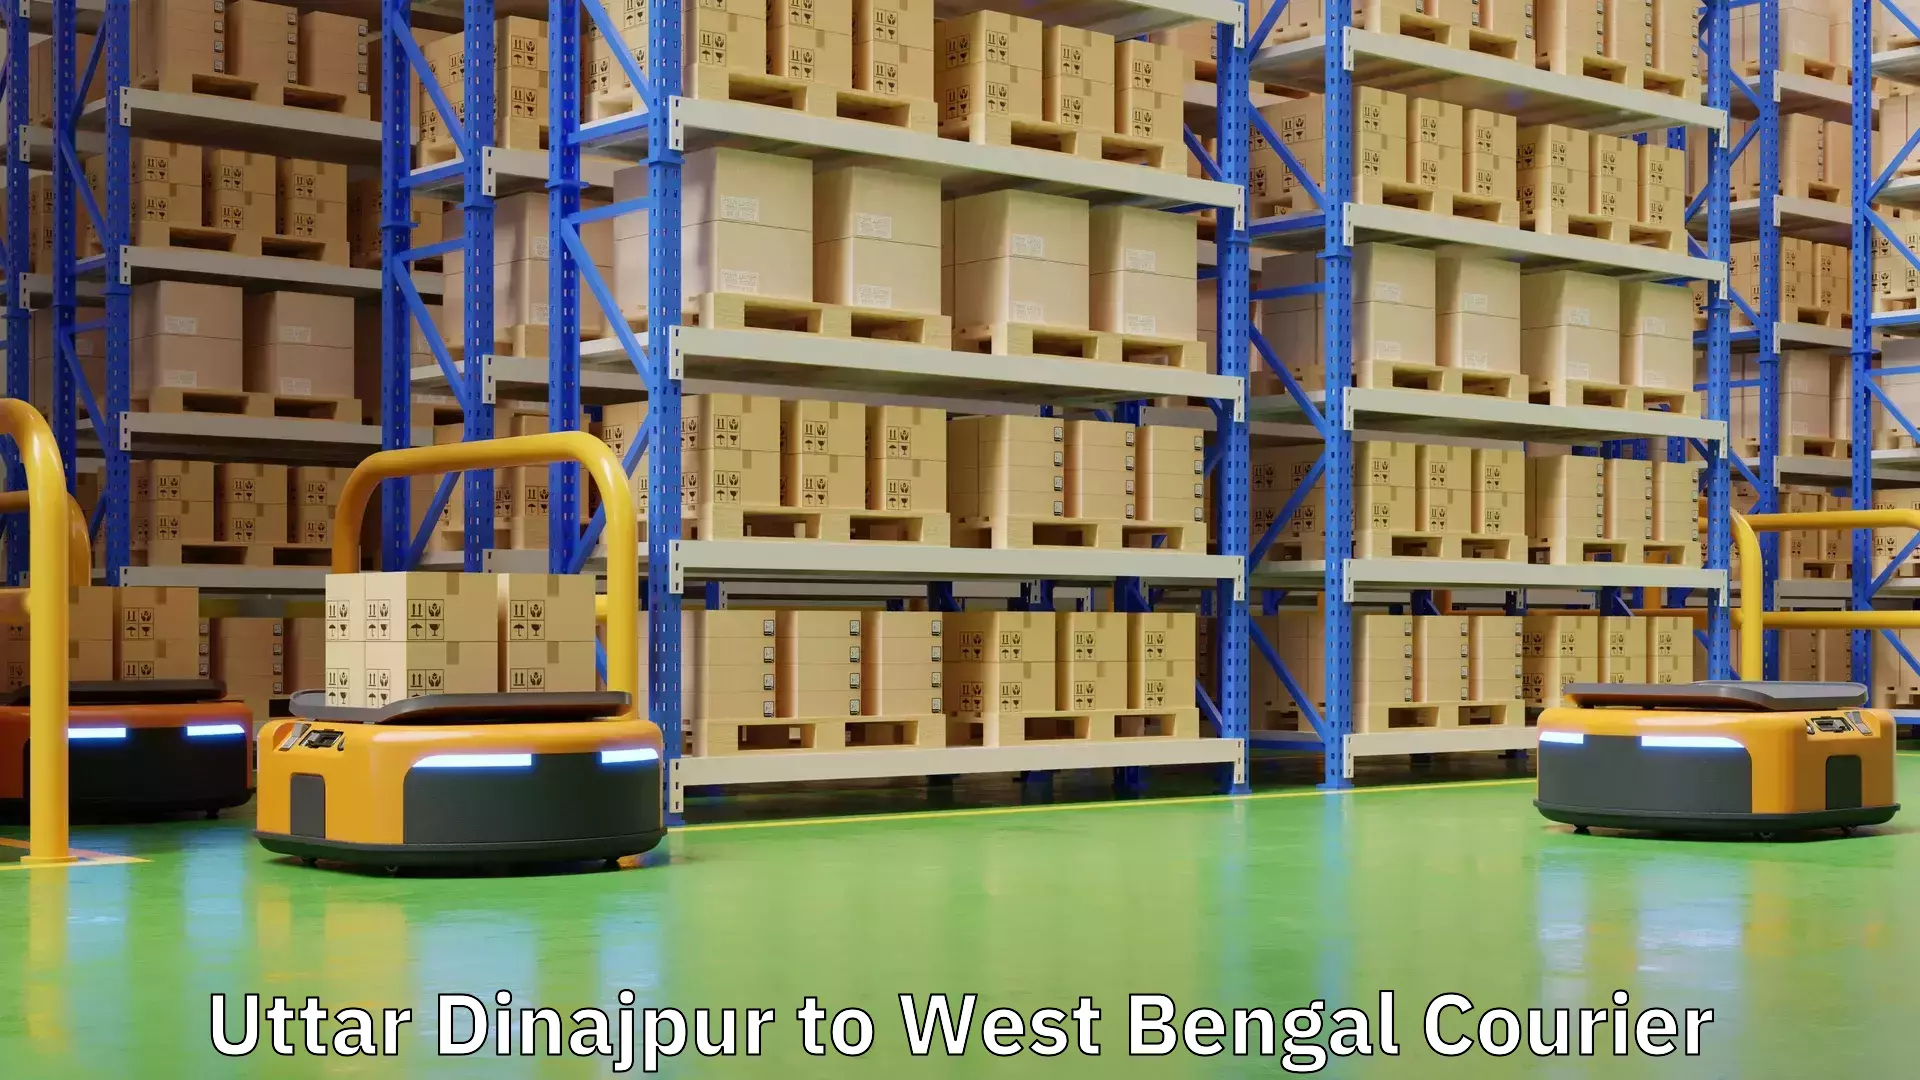 Same-day delivery options Uttar Dinajpur to West Bengal